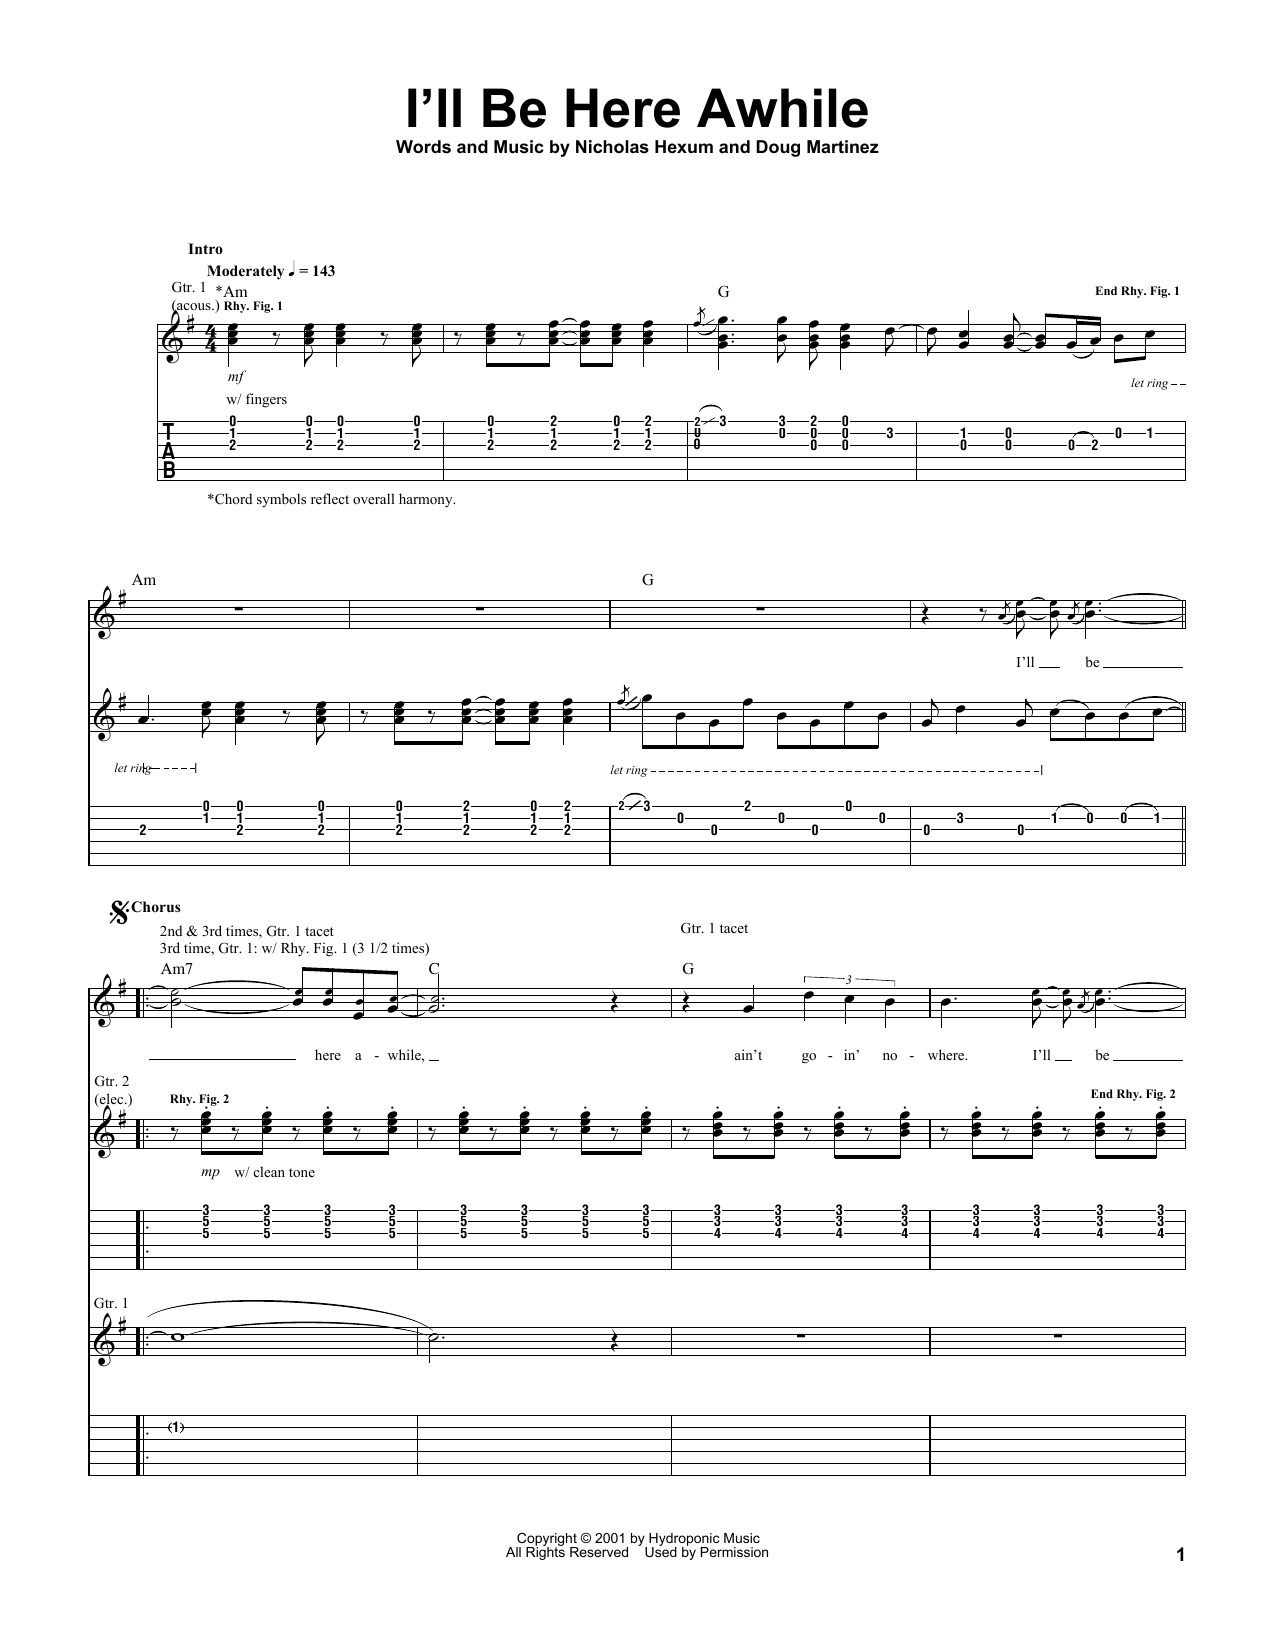 Download 311 I'll Be Here Awhile Sheet Music